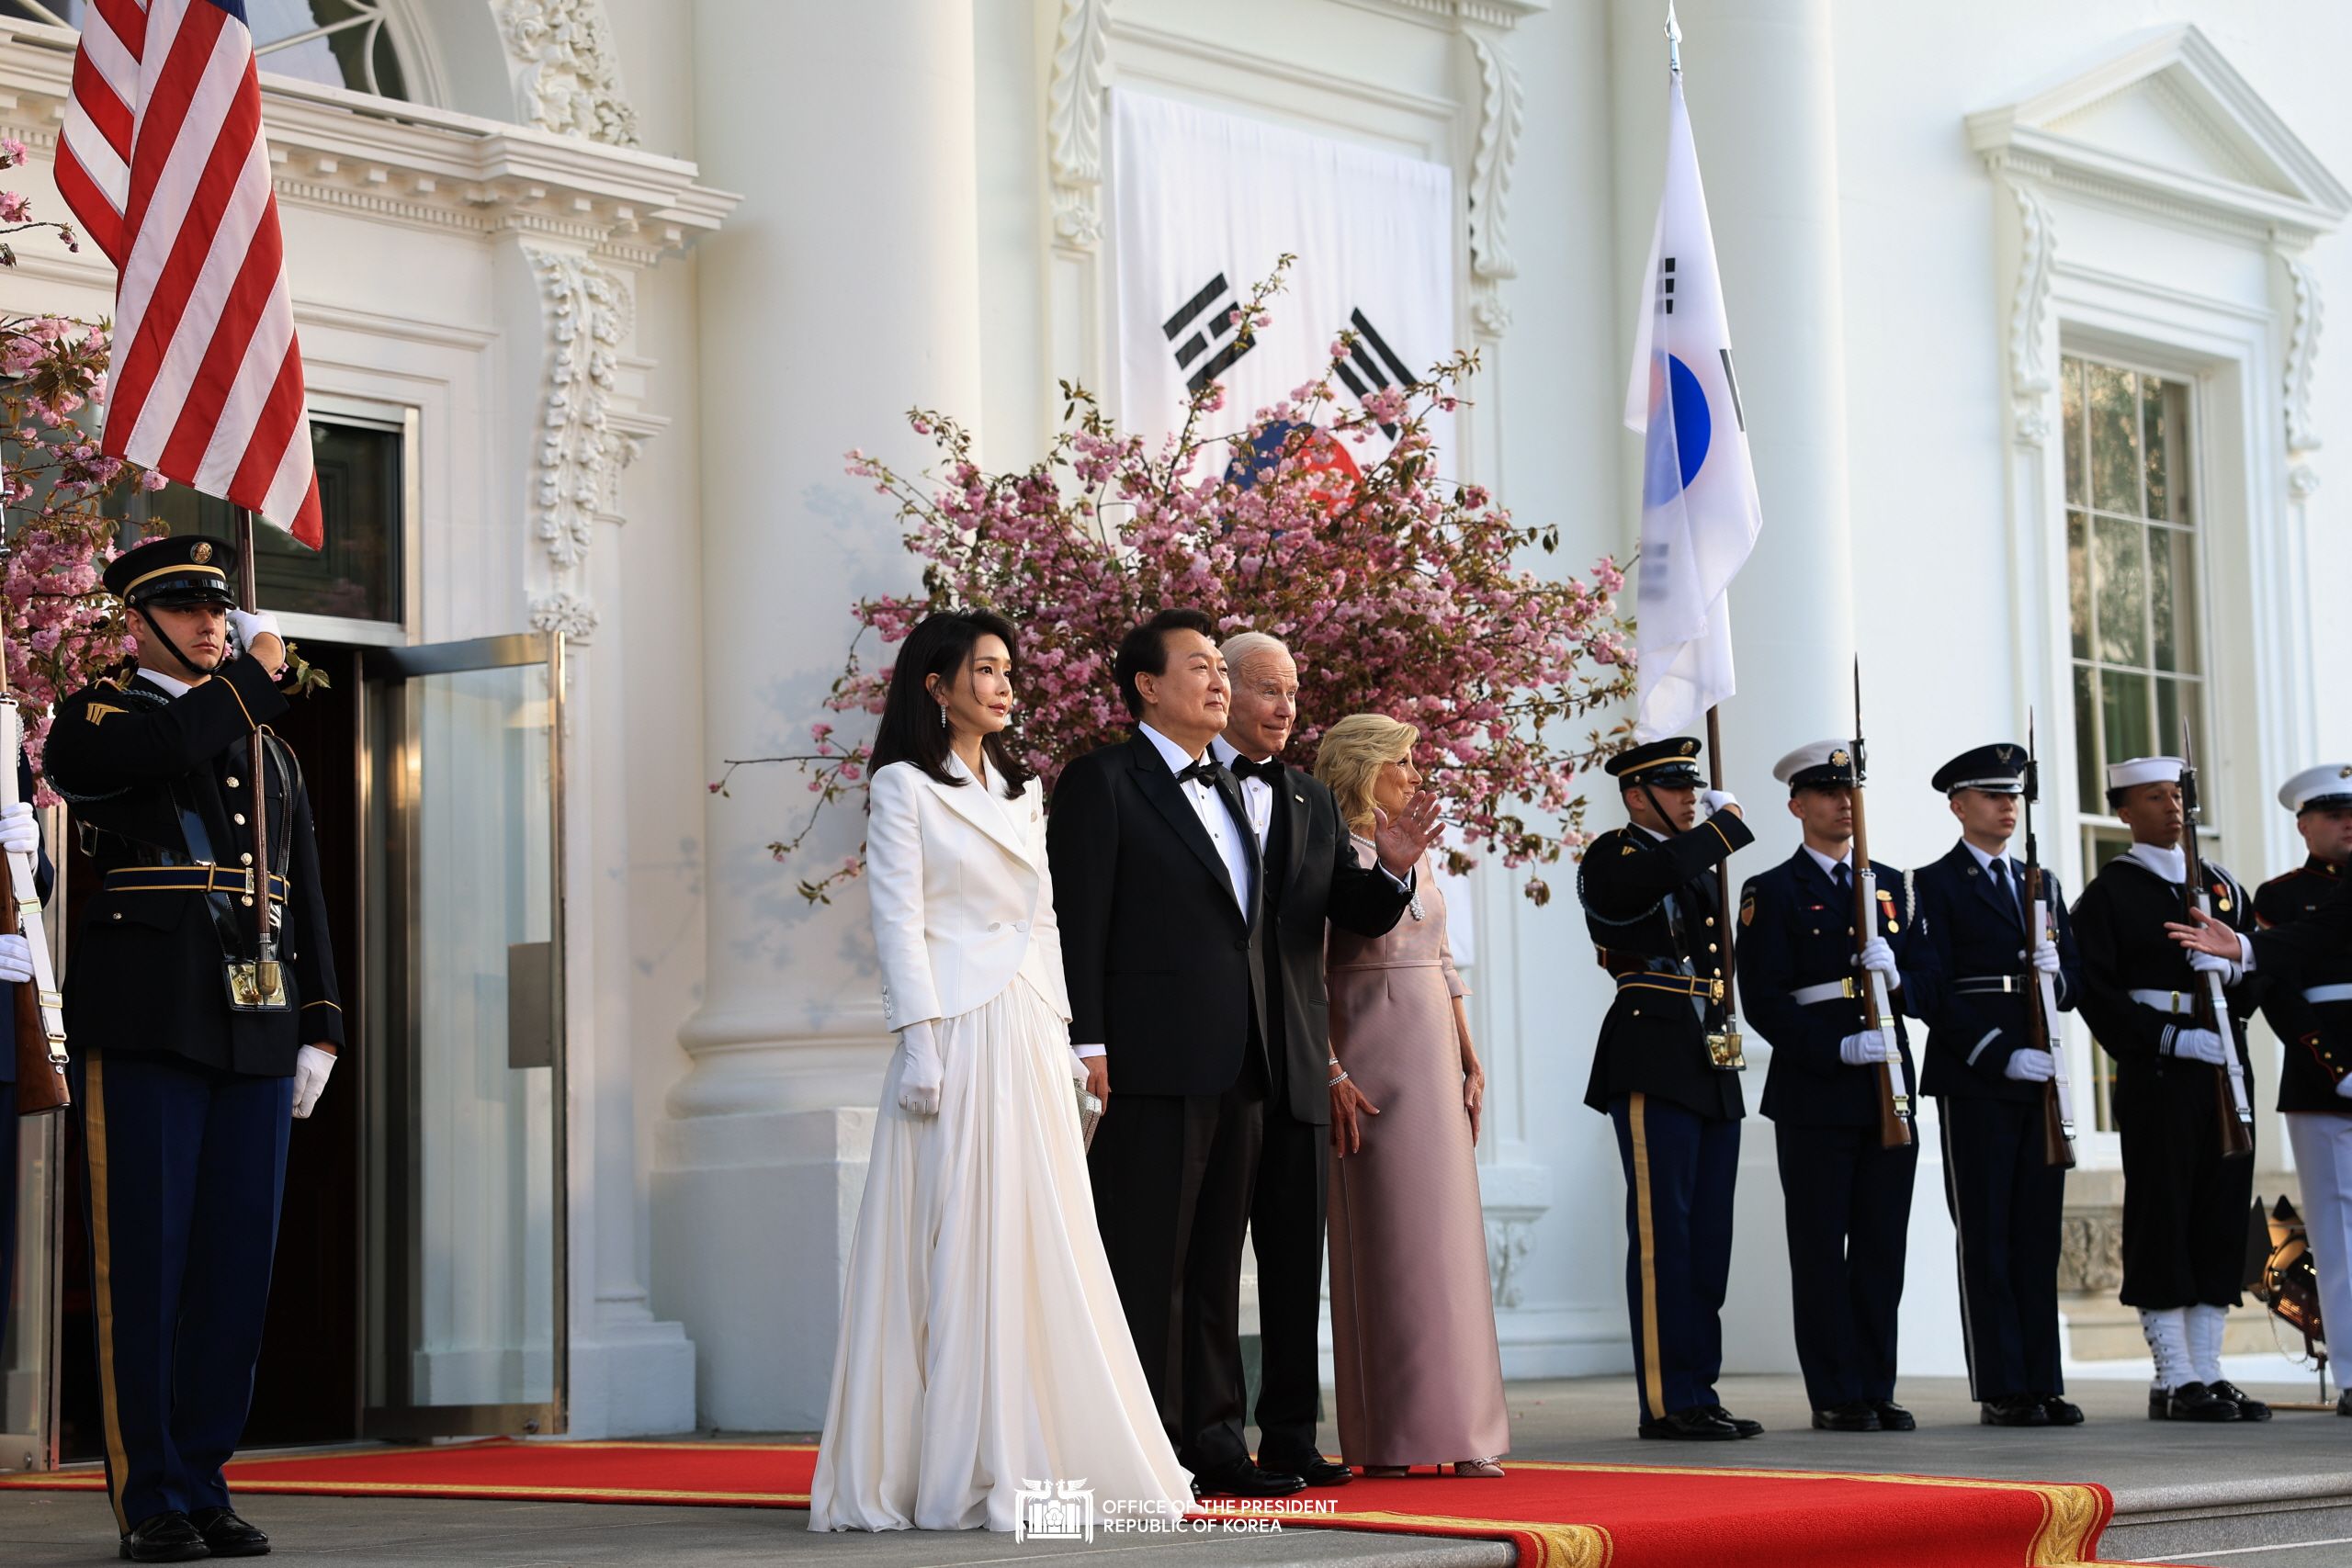 The President and First Lady attending the State Dinner hosted by the U.S. President and First Lady Slide1